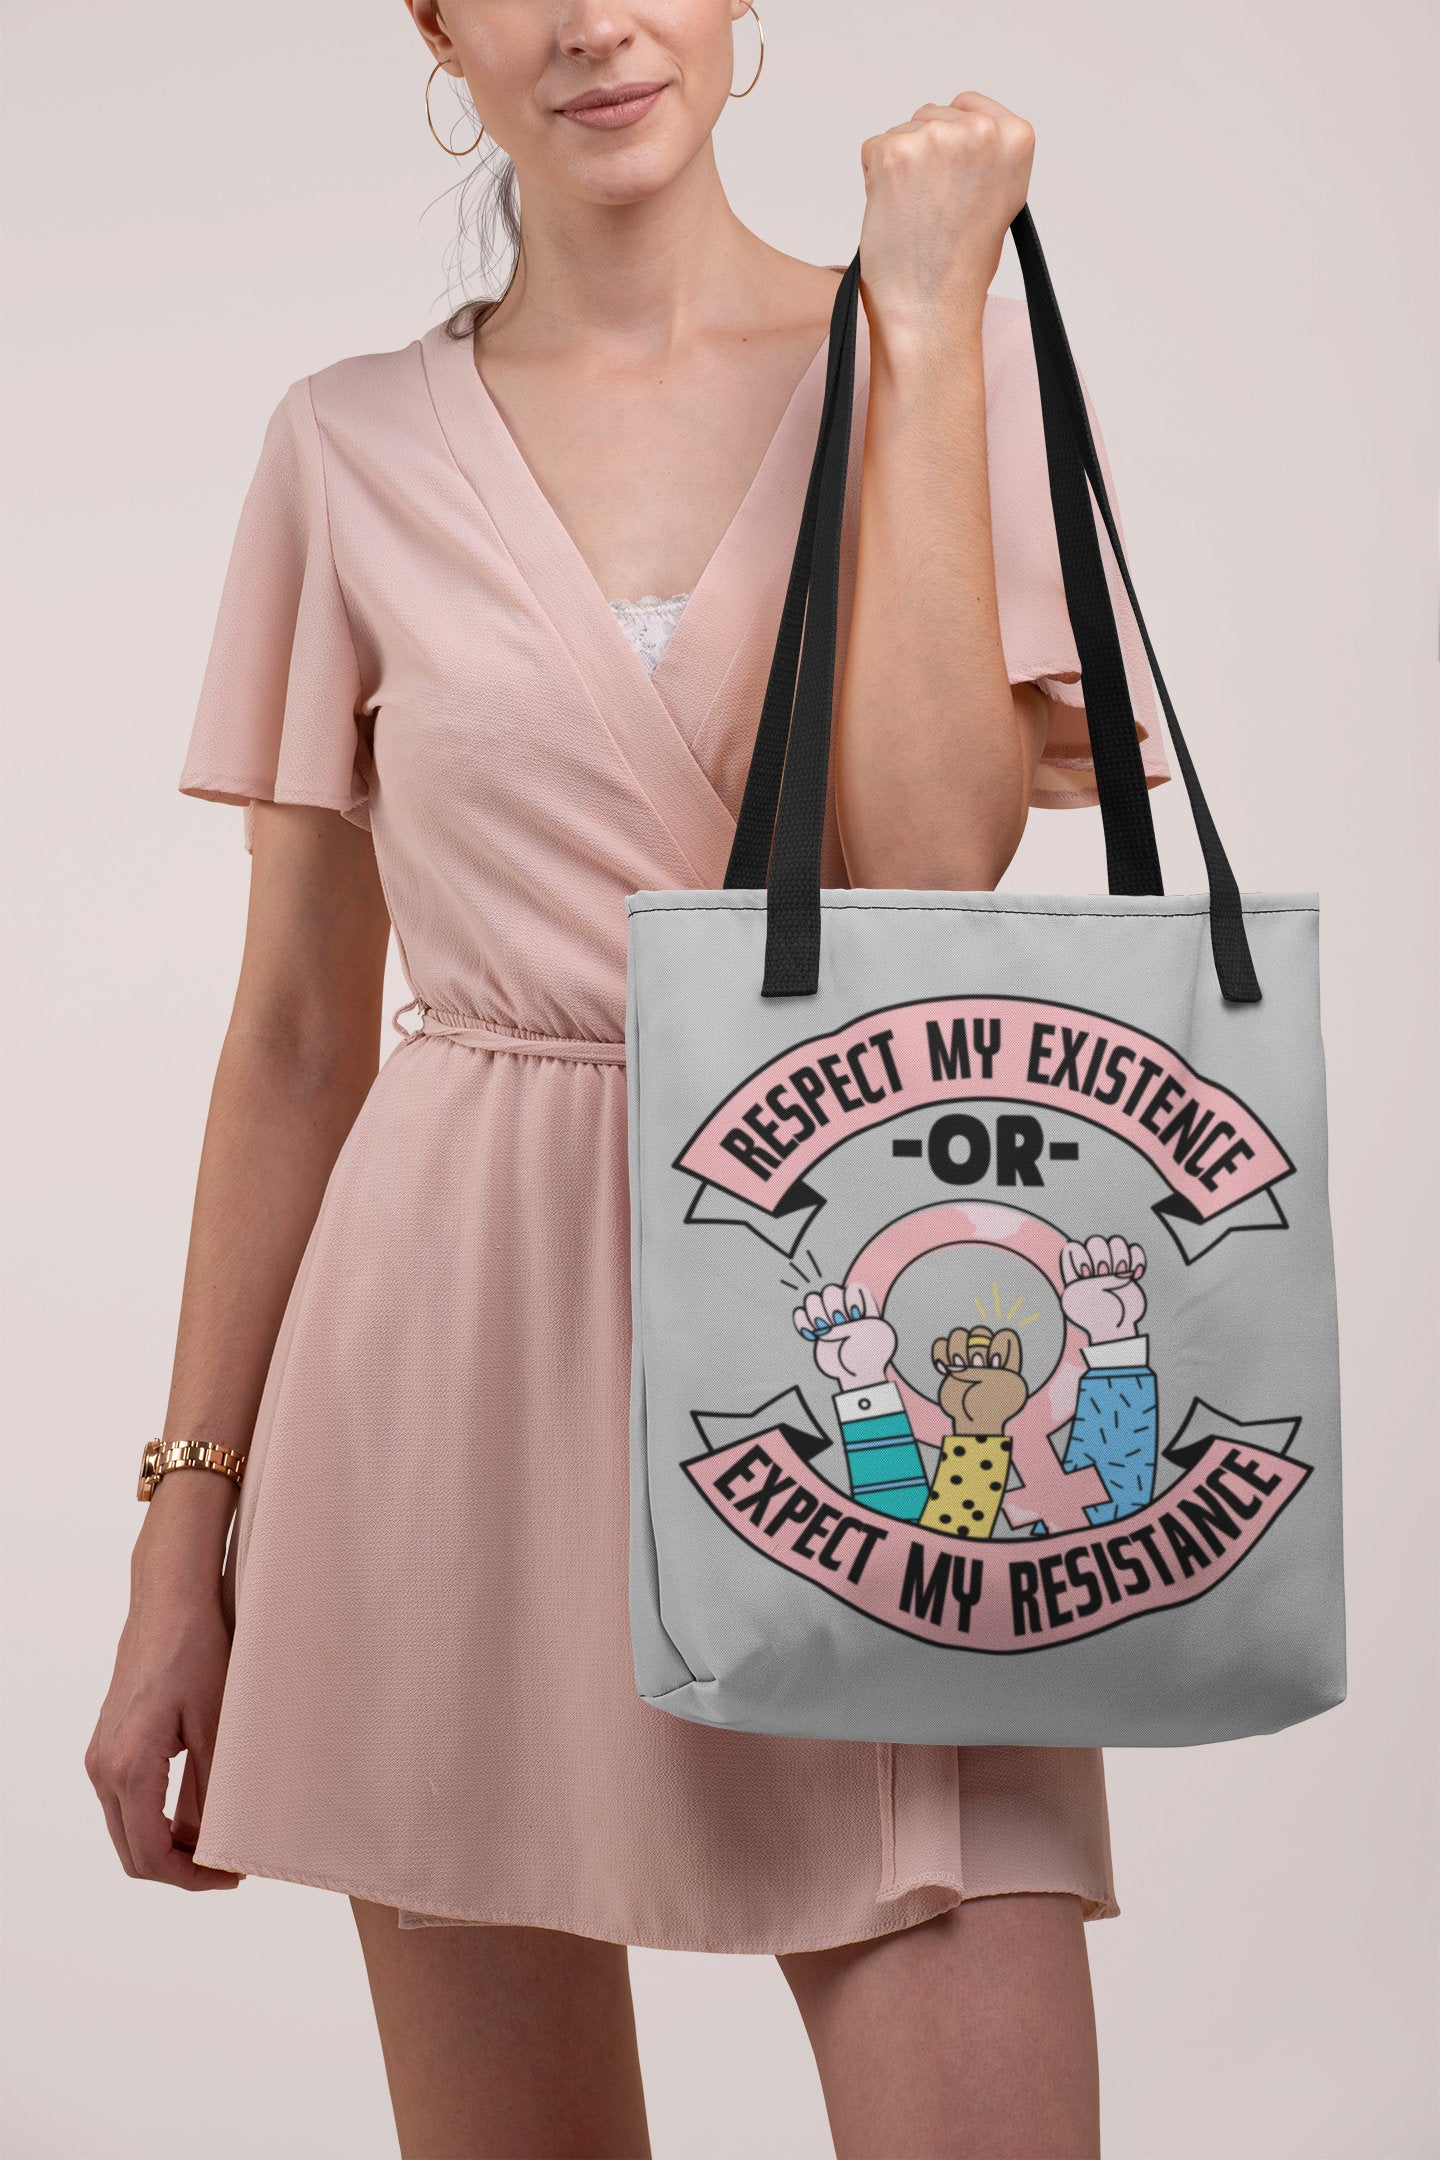 Respect Women's Bodies Tote Bag / My Body My Choice Pro 